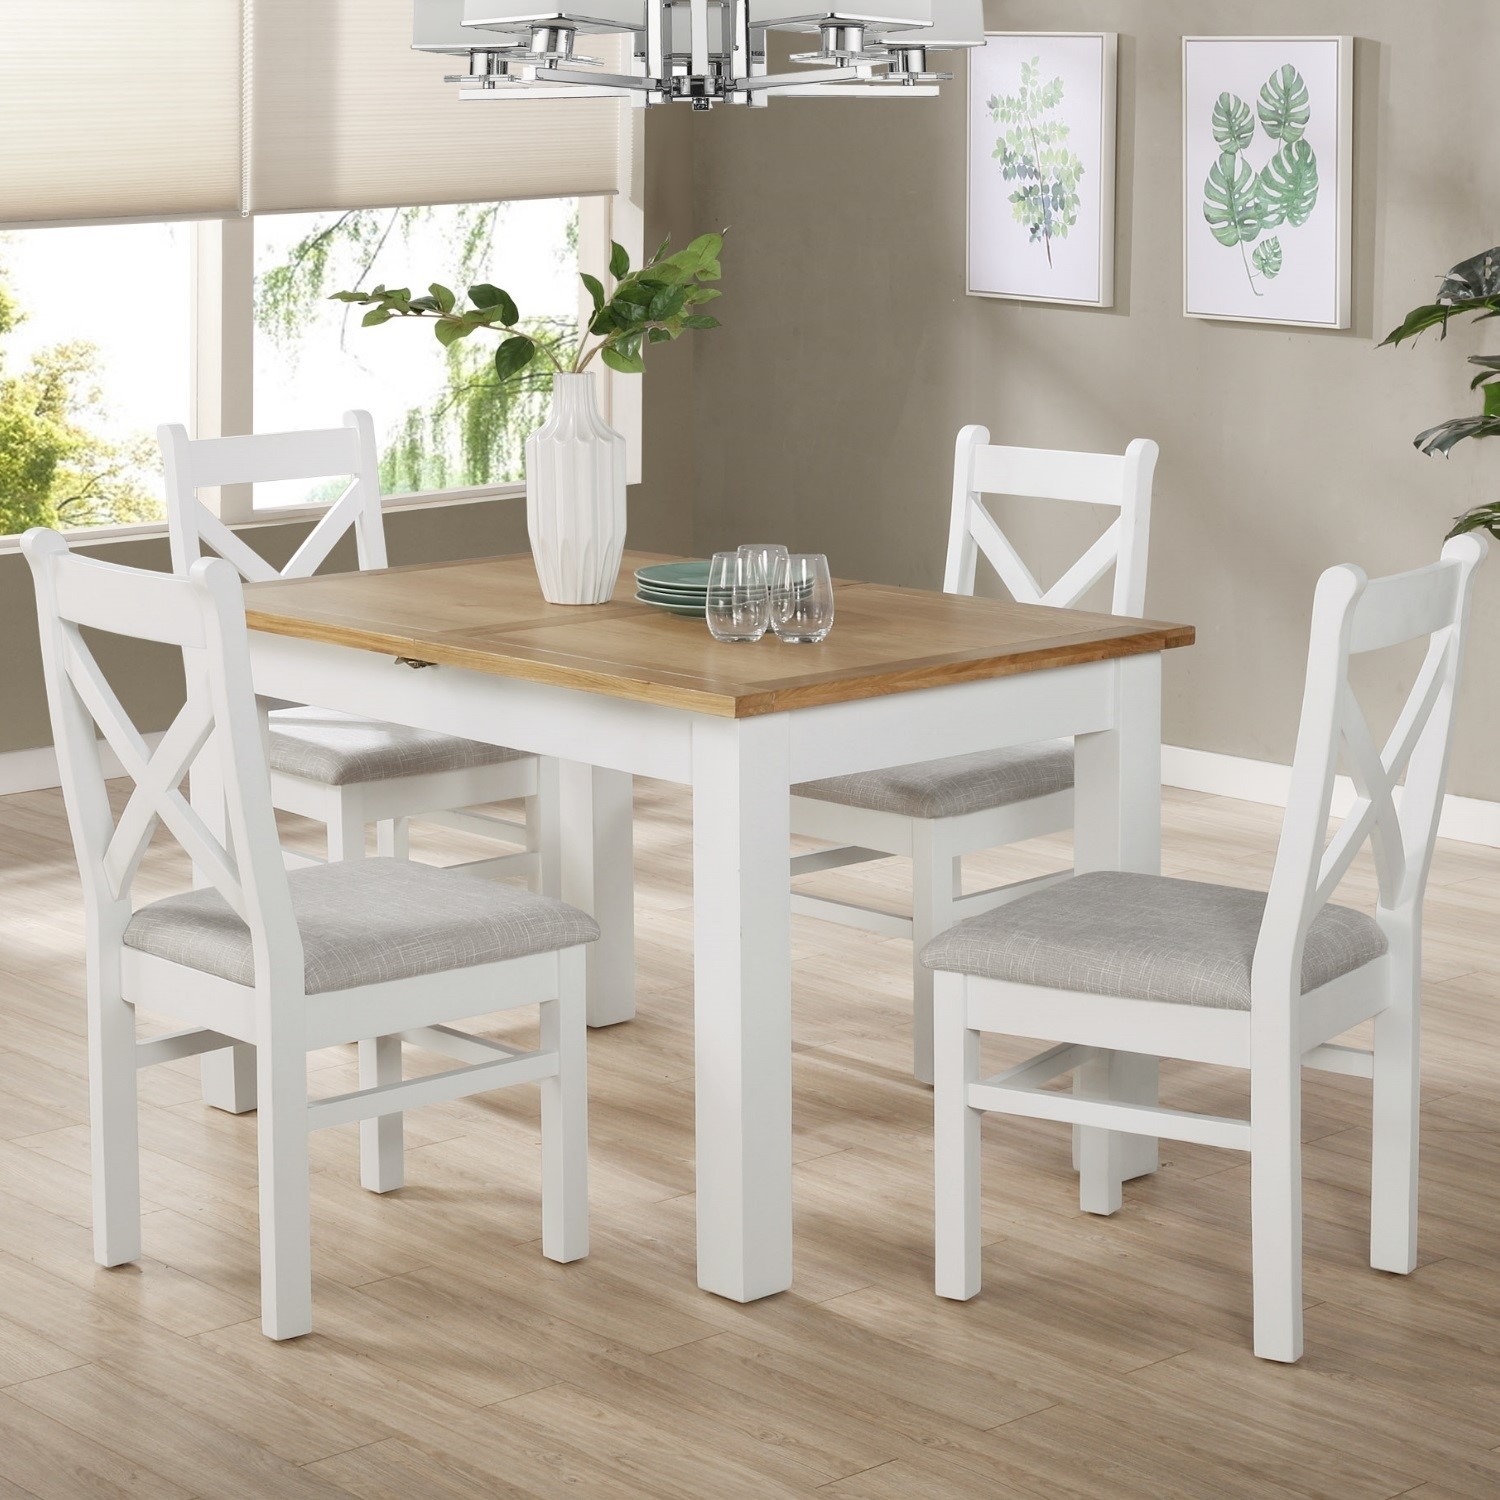 White Oak Extendable Dining Set With 4 White Dining Chairs Aylesbury Furniture123